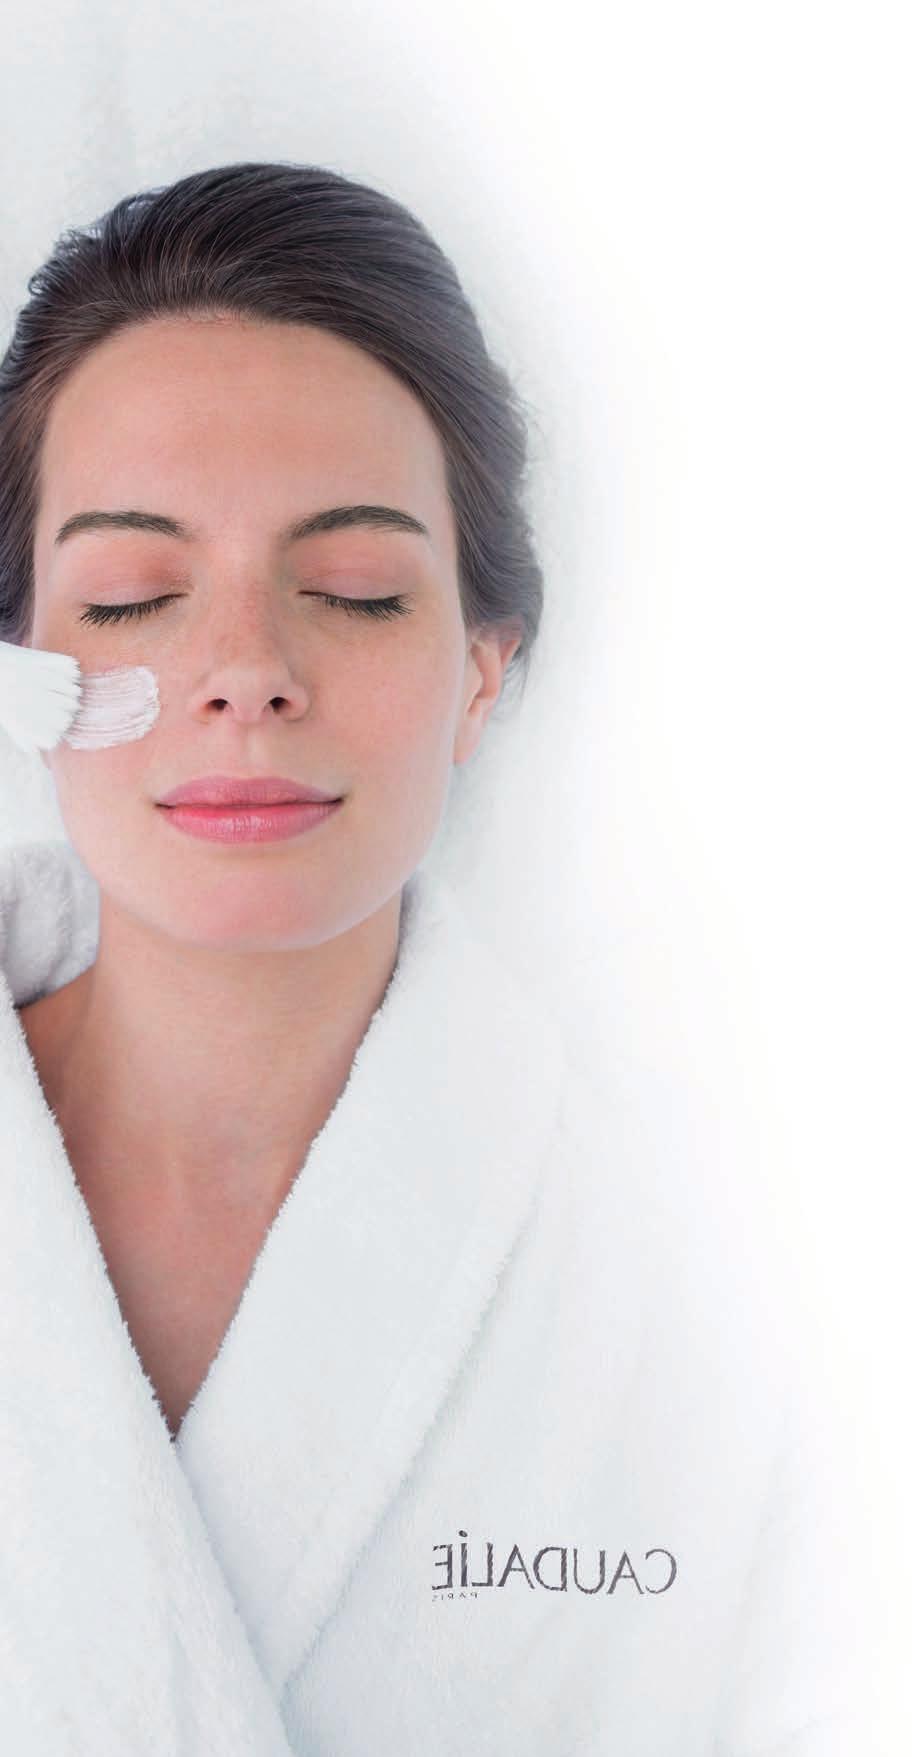 Facial Treatments & Care Vineactiv Facial, Anti-wrinkle, recharge & Glow A deeply energizing vitamin cocktail.